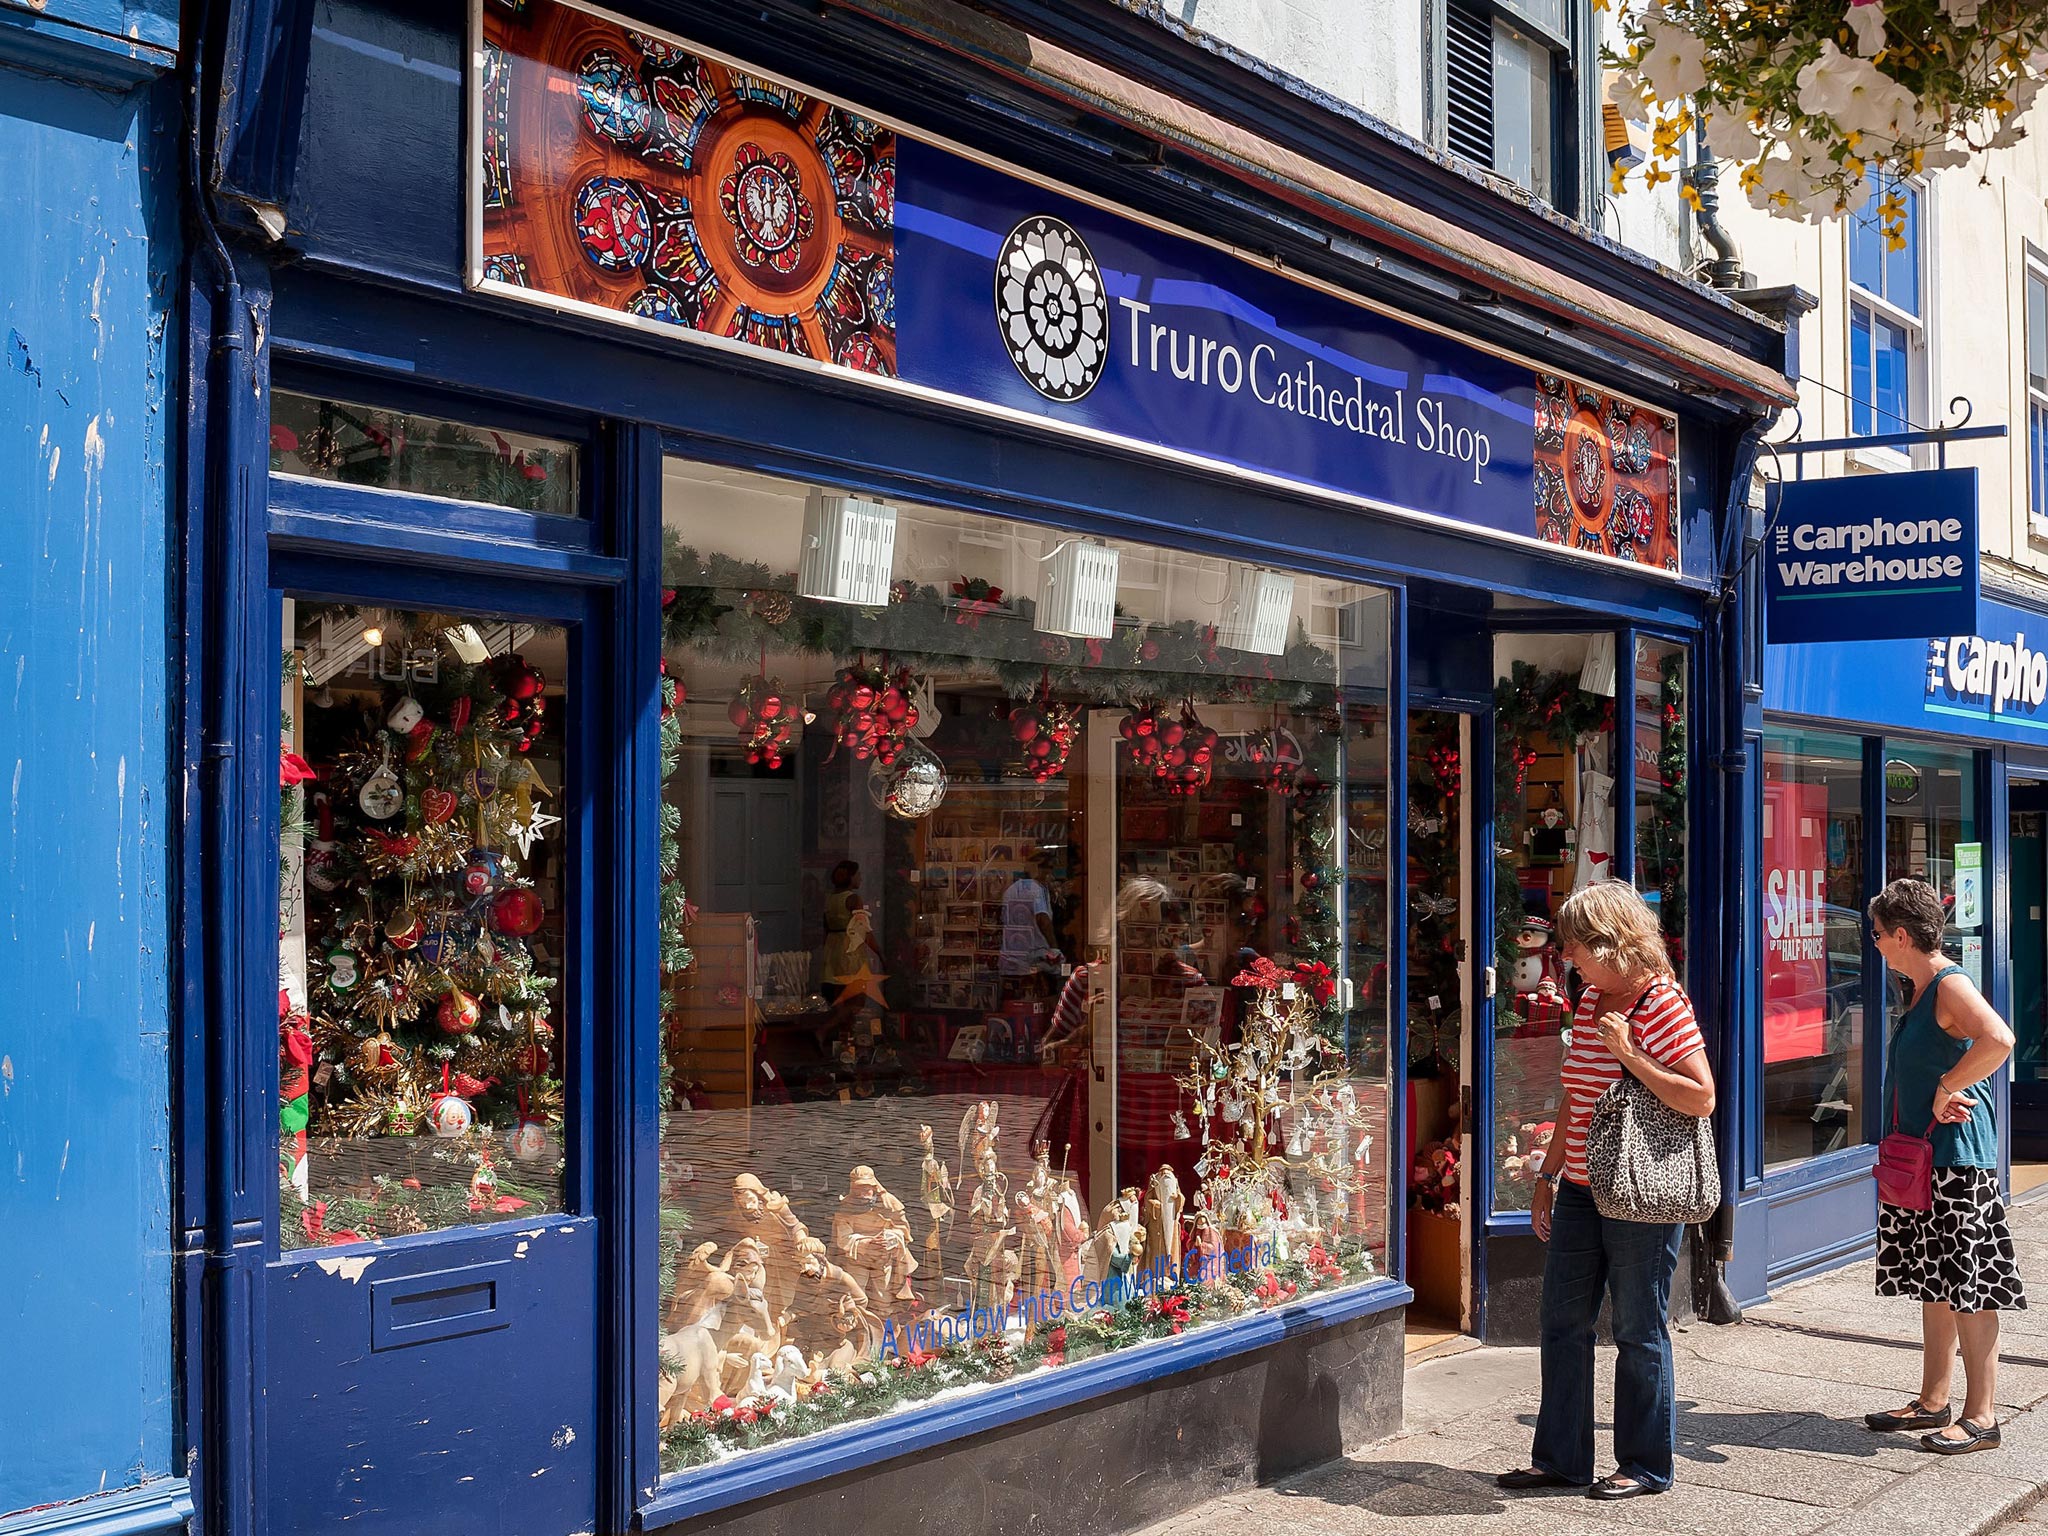 The Christmas themed Truro Cathedral Shop opened in Truro today despite record summer temperatures